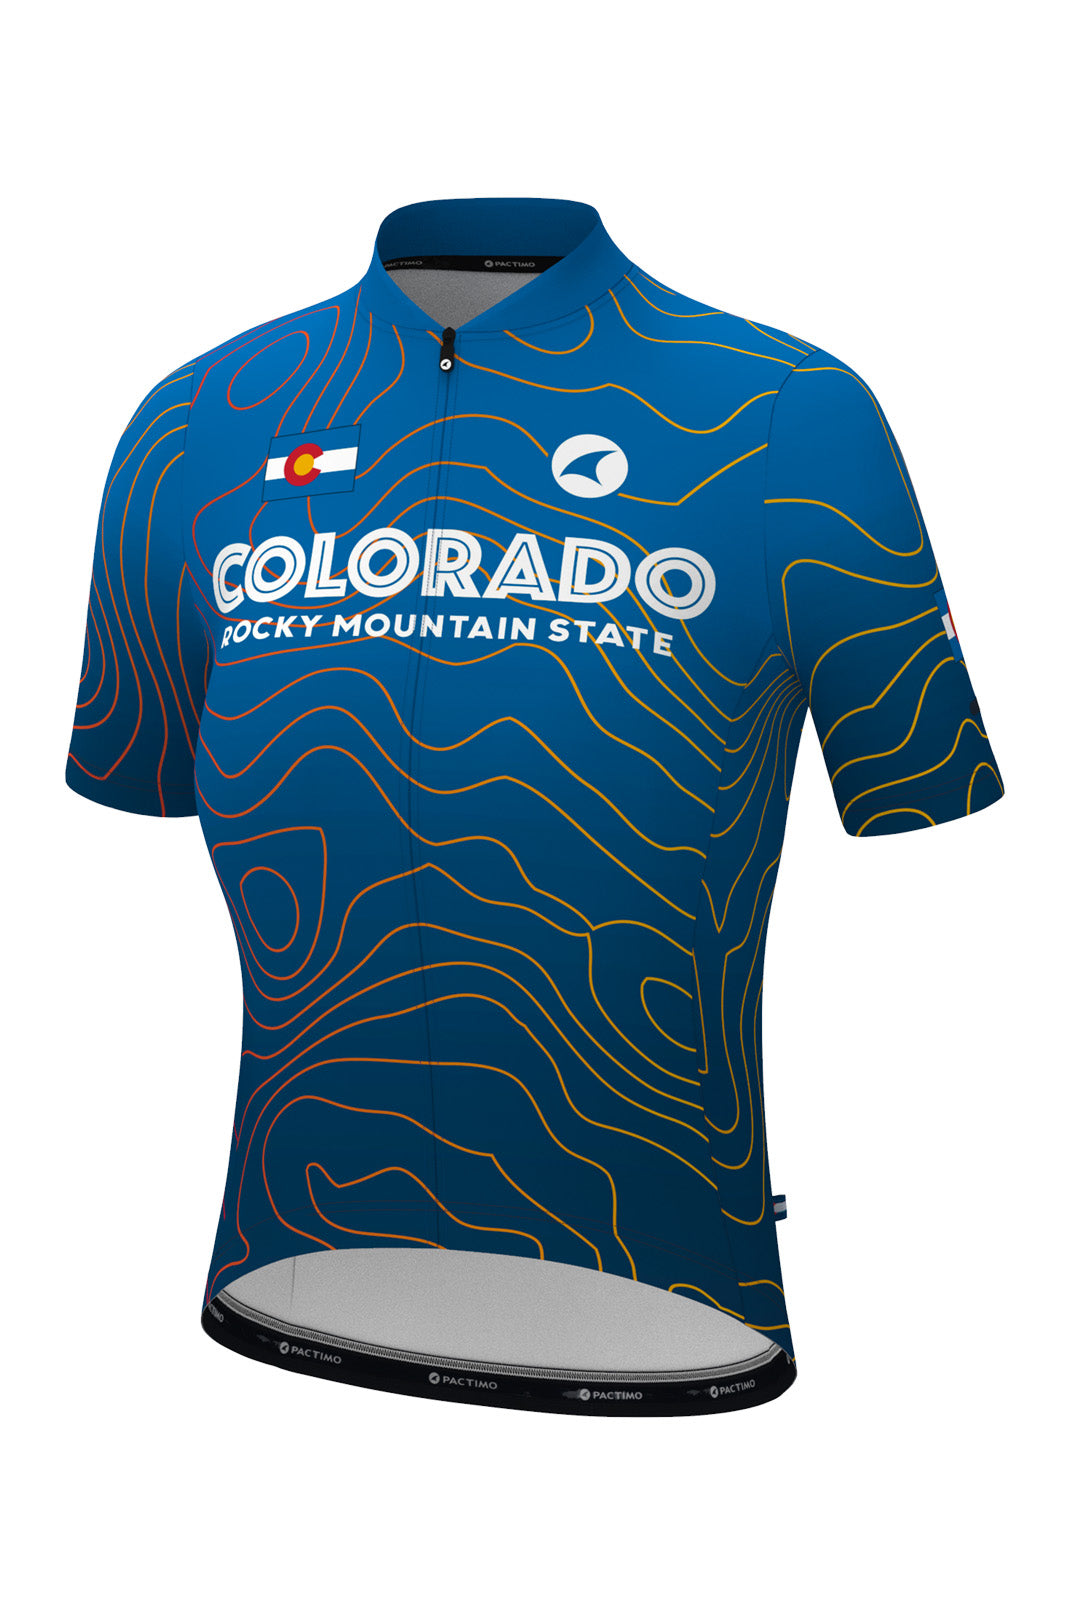 Women's Loose Fit Colorado Cycling Jersey - Dusk Ombre Front View 